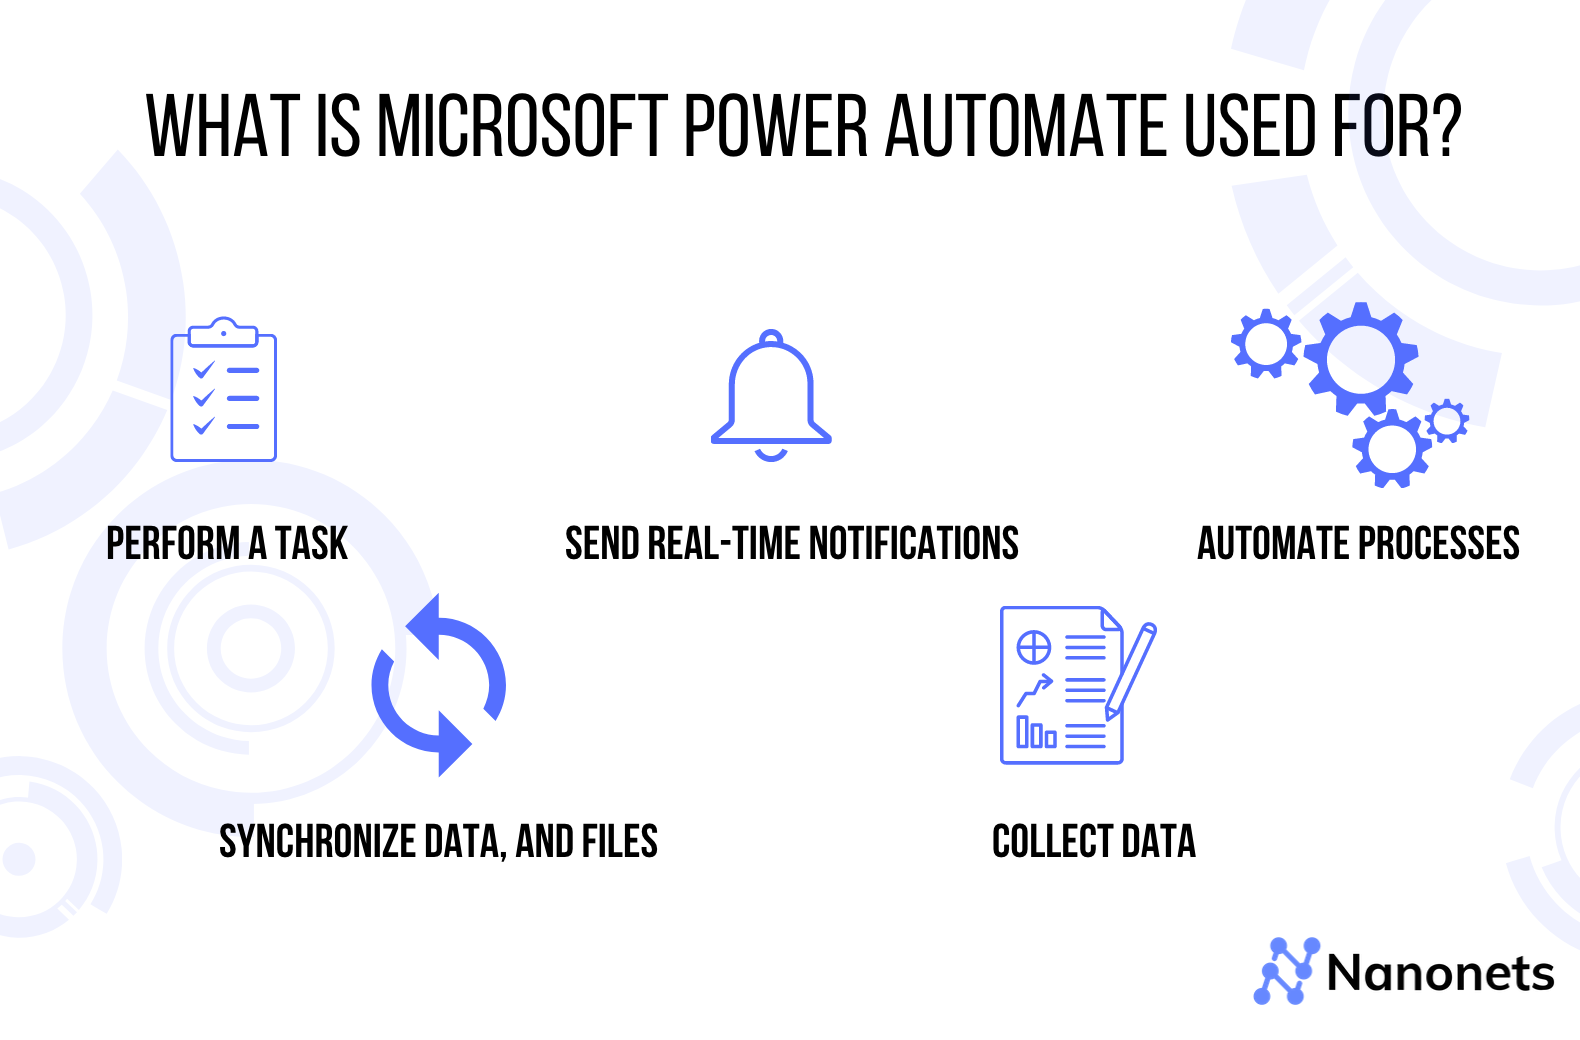 What is Microsoft Power Automate used for?